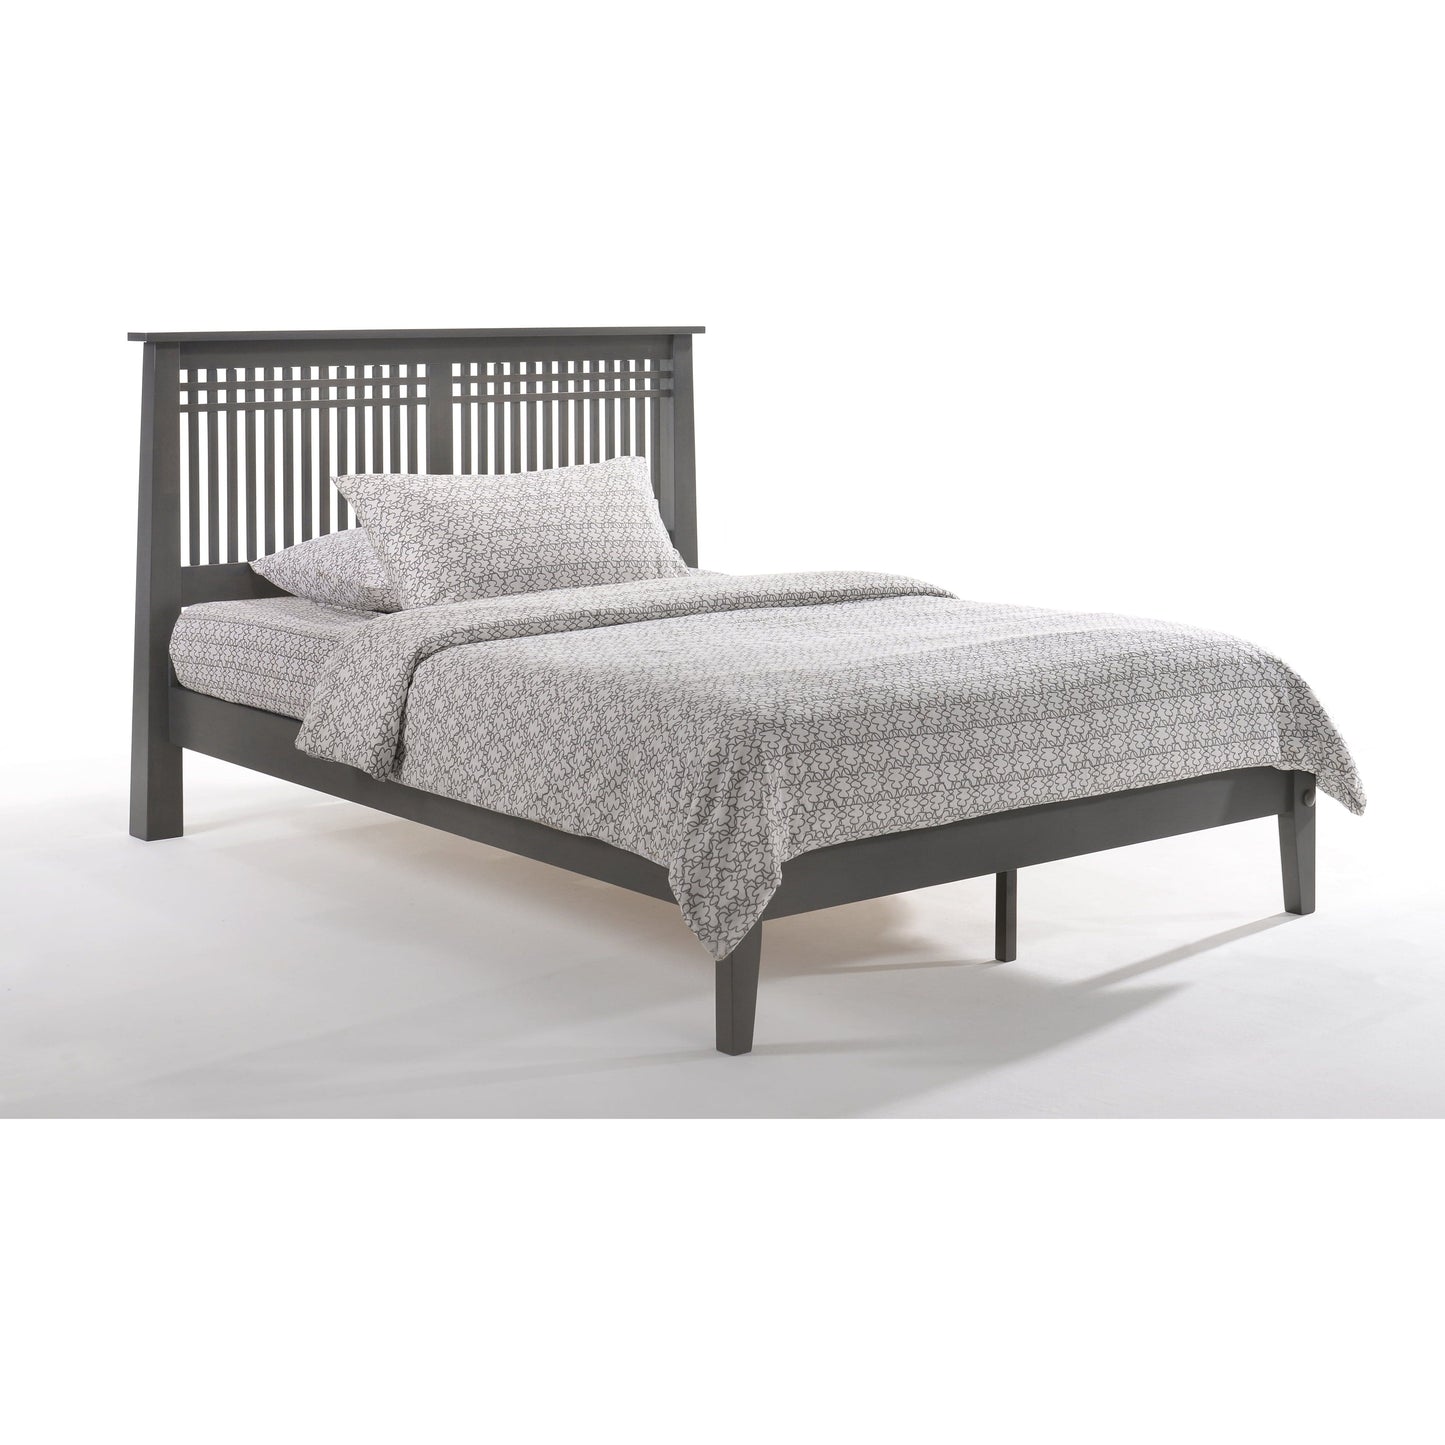 Night And Day Twin Solstice Bed in cherry finish (P Series) Stonewash SOL-PH-TWN-STW-COM